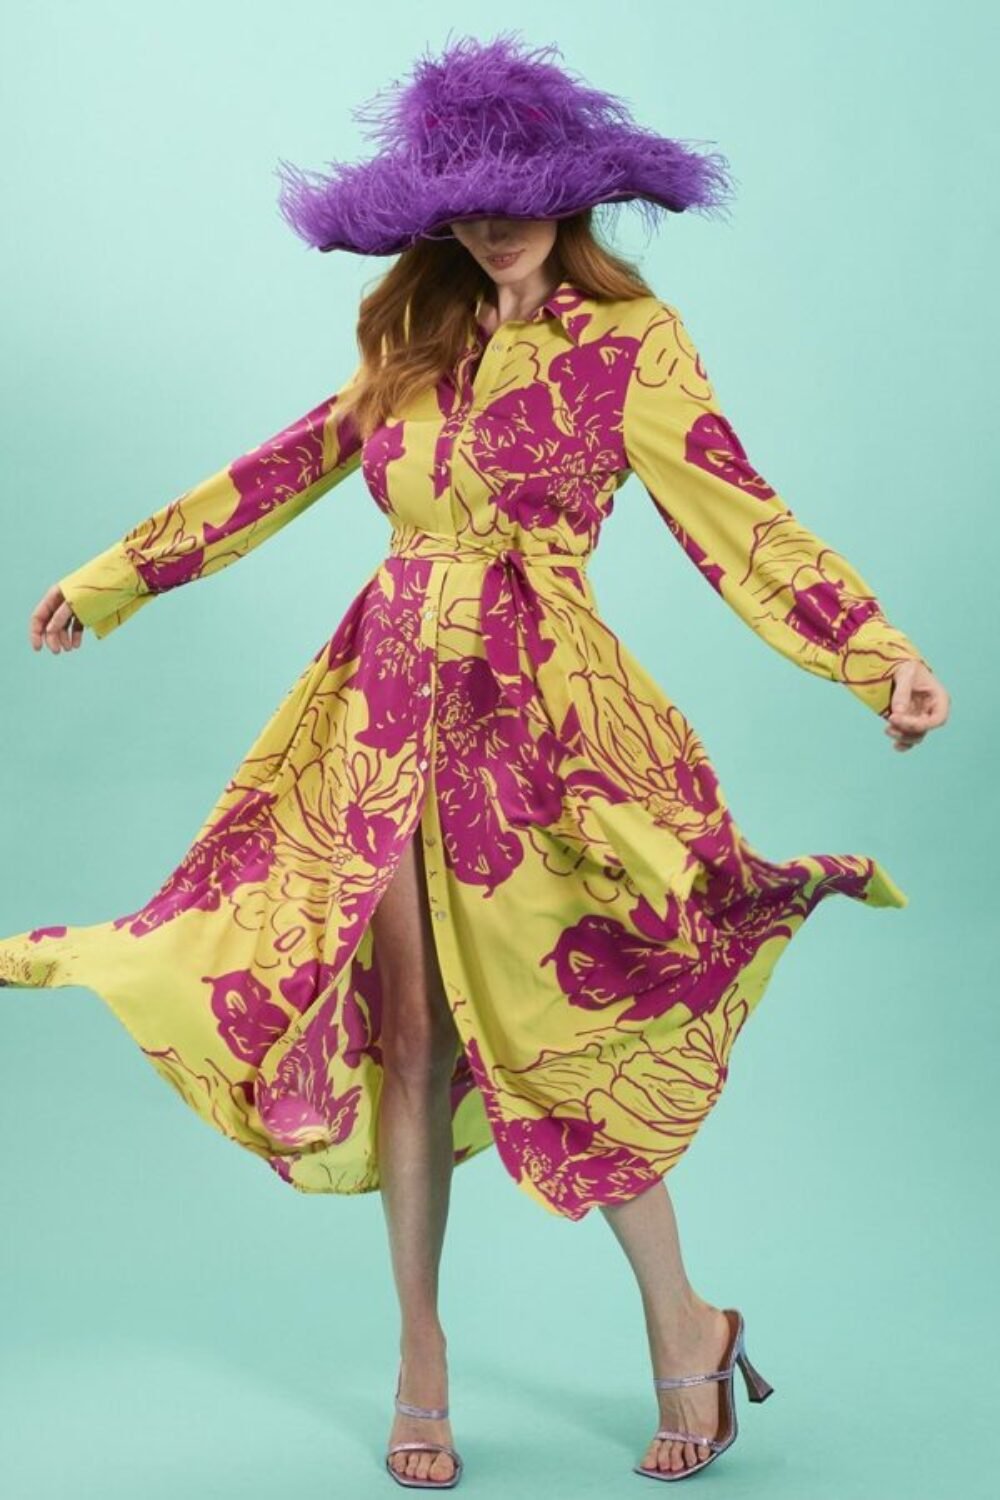 Shop Lux Rayon Blend Sienna Floral Maxi Dress and women's luxury and designer clothes at www.lux-apparel.co.uk